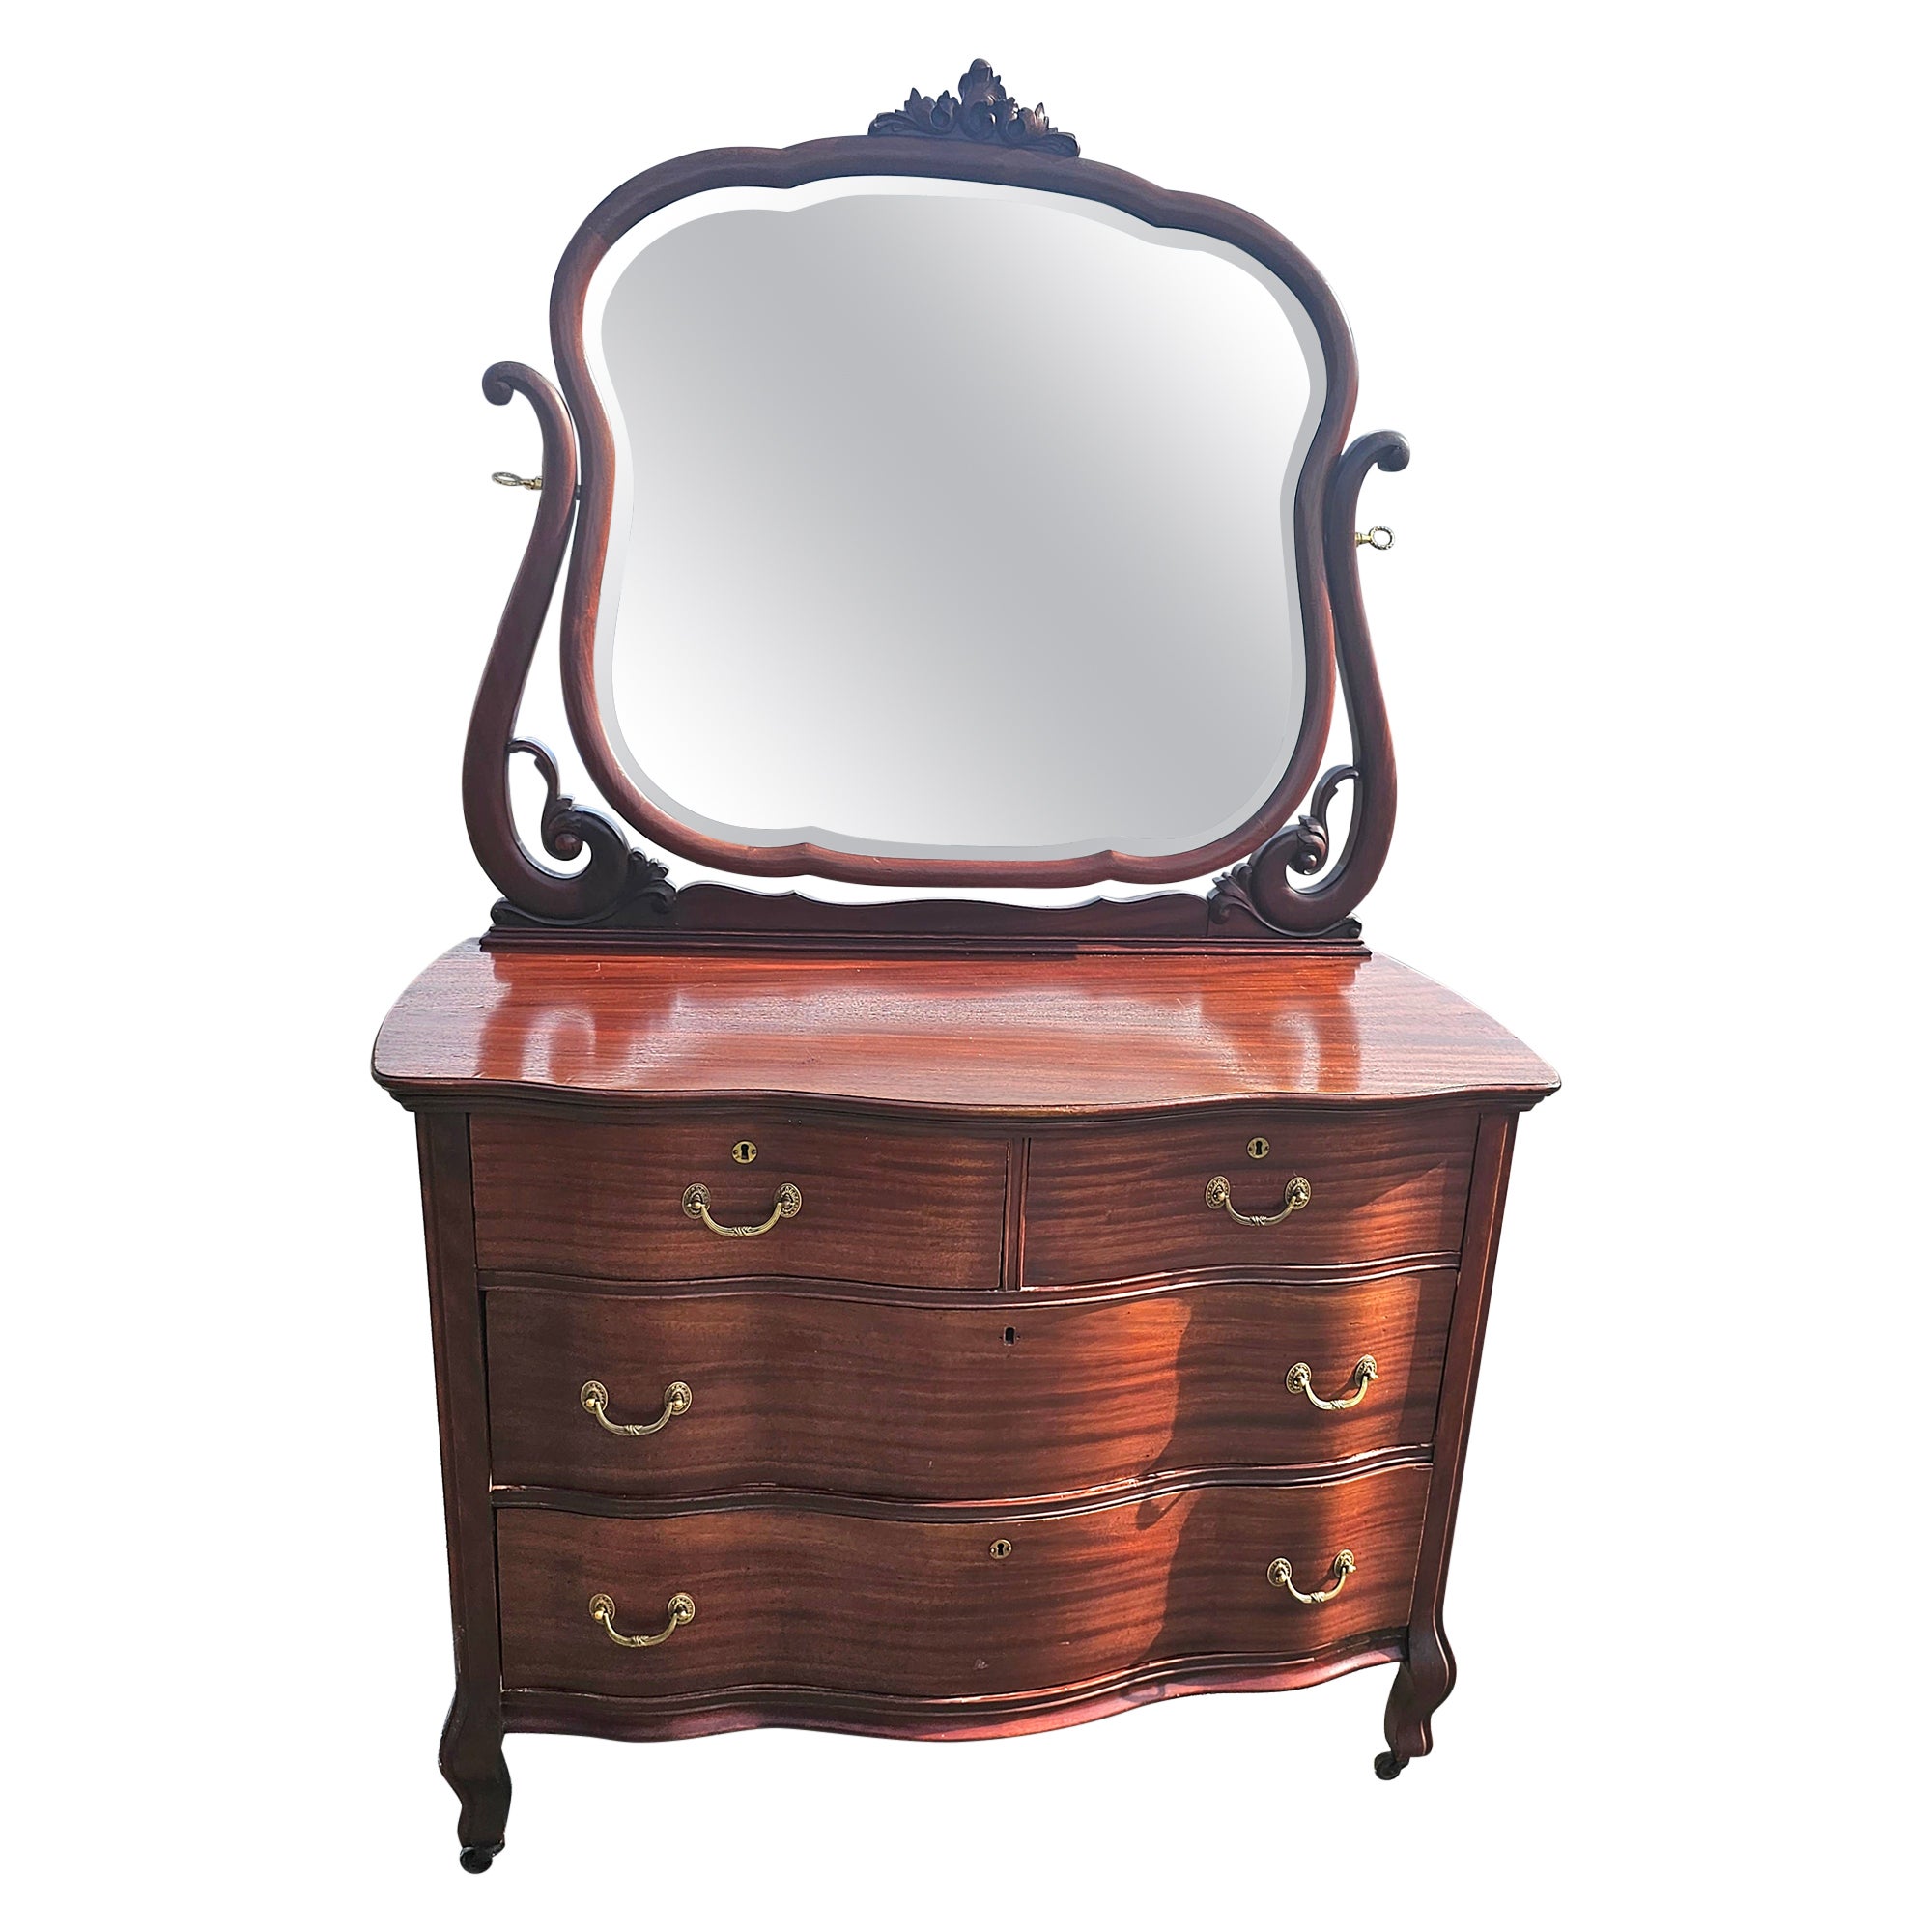 Early 20th Century Widdicomb Mahogany Serpentine Chest with Mirror on Wheels